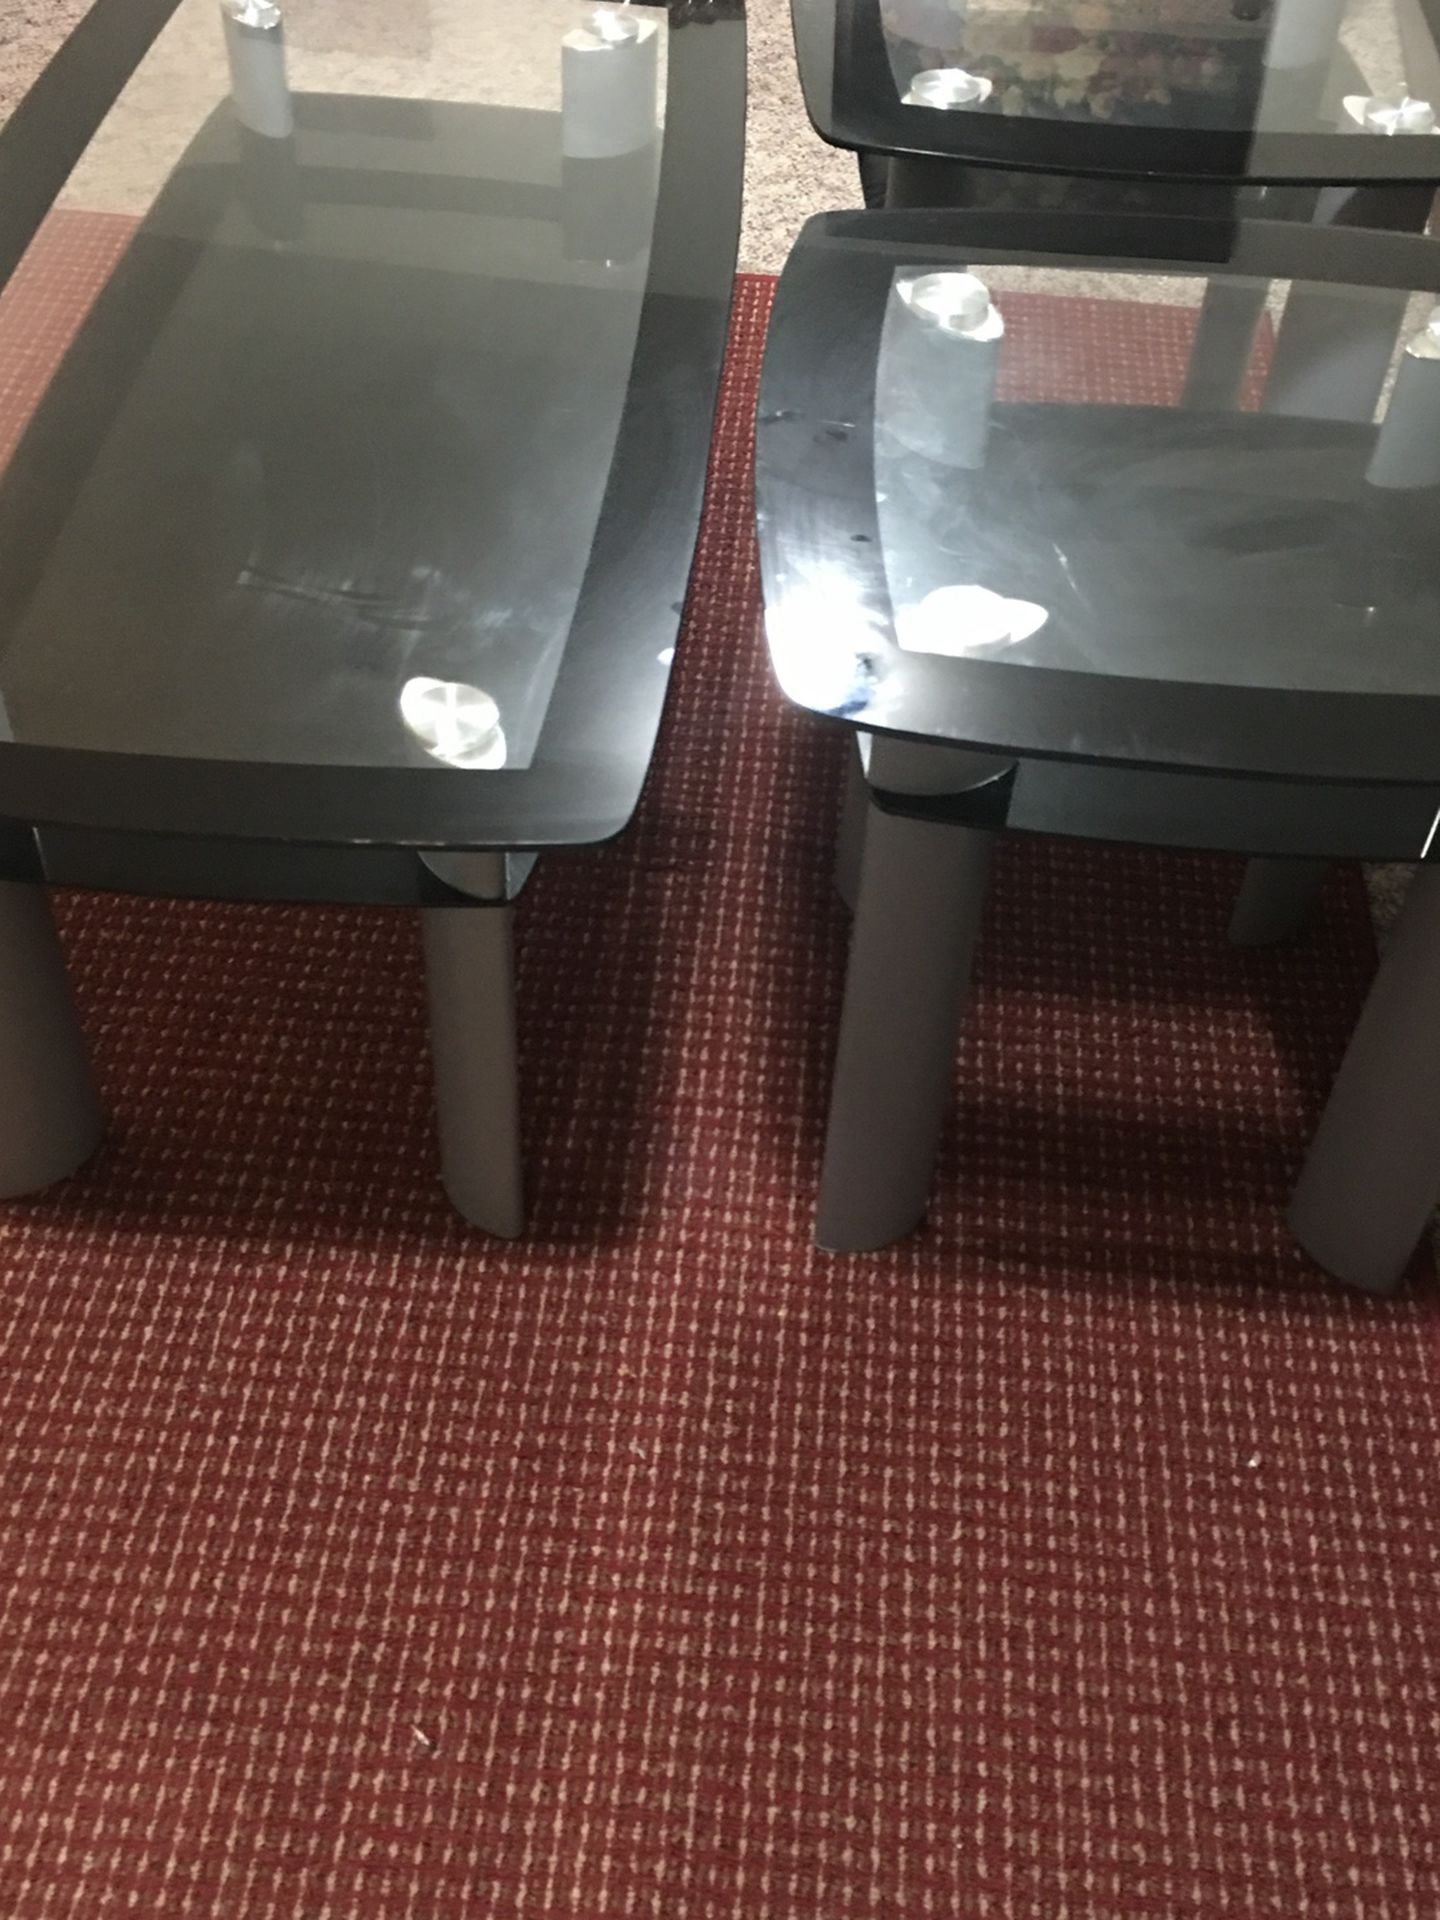 Glass 3 piece Coffee Table set. Great condition, like new and clean. Very lightly used. 3 piece set: one big table with 2 side tables. Hardly even